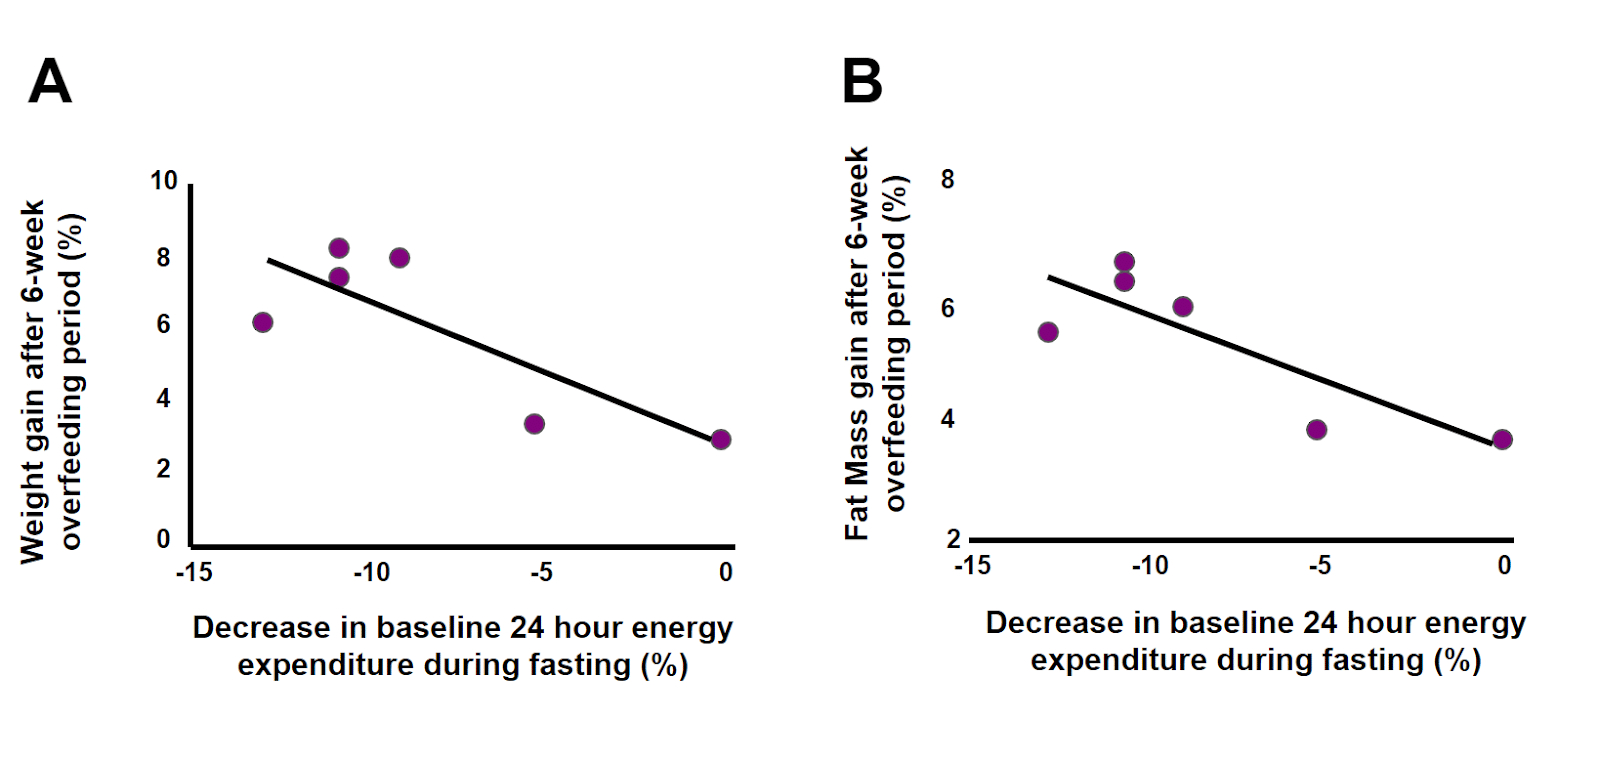 Two-part graph comparing weight and fat mass gain to energy expenditure decrease during fasting. Panel A shows the relationship between weight gain after a 6-week overfeeding period and the decrease in baseline 24-hour energy expenditure, with data points trending downward. Panel B shows the relationship between fat mass gain after overfeeding and energy expenditure decrease, also with a downward trend. Both have a negative correlation, depicted by a straight line through the data points on each graph